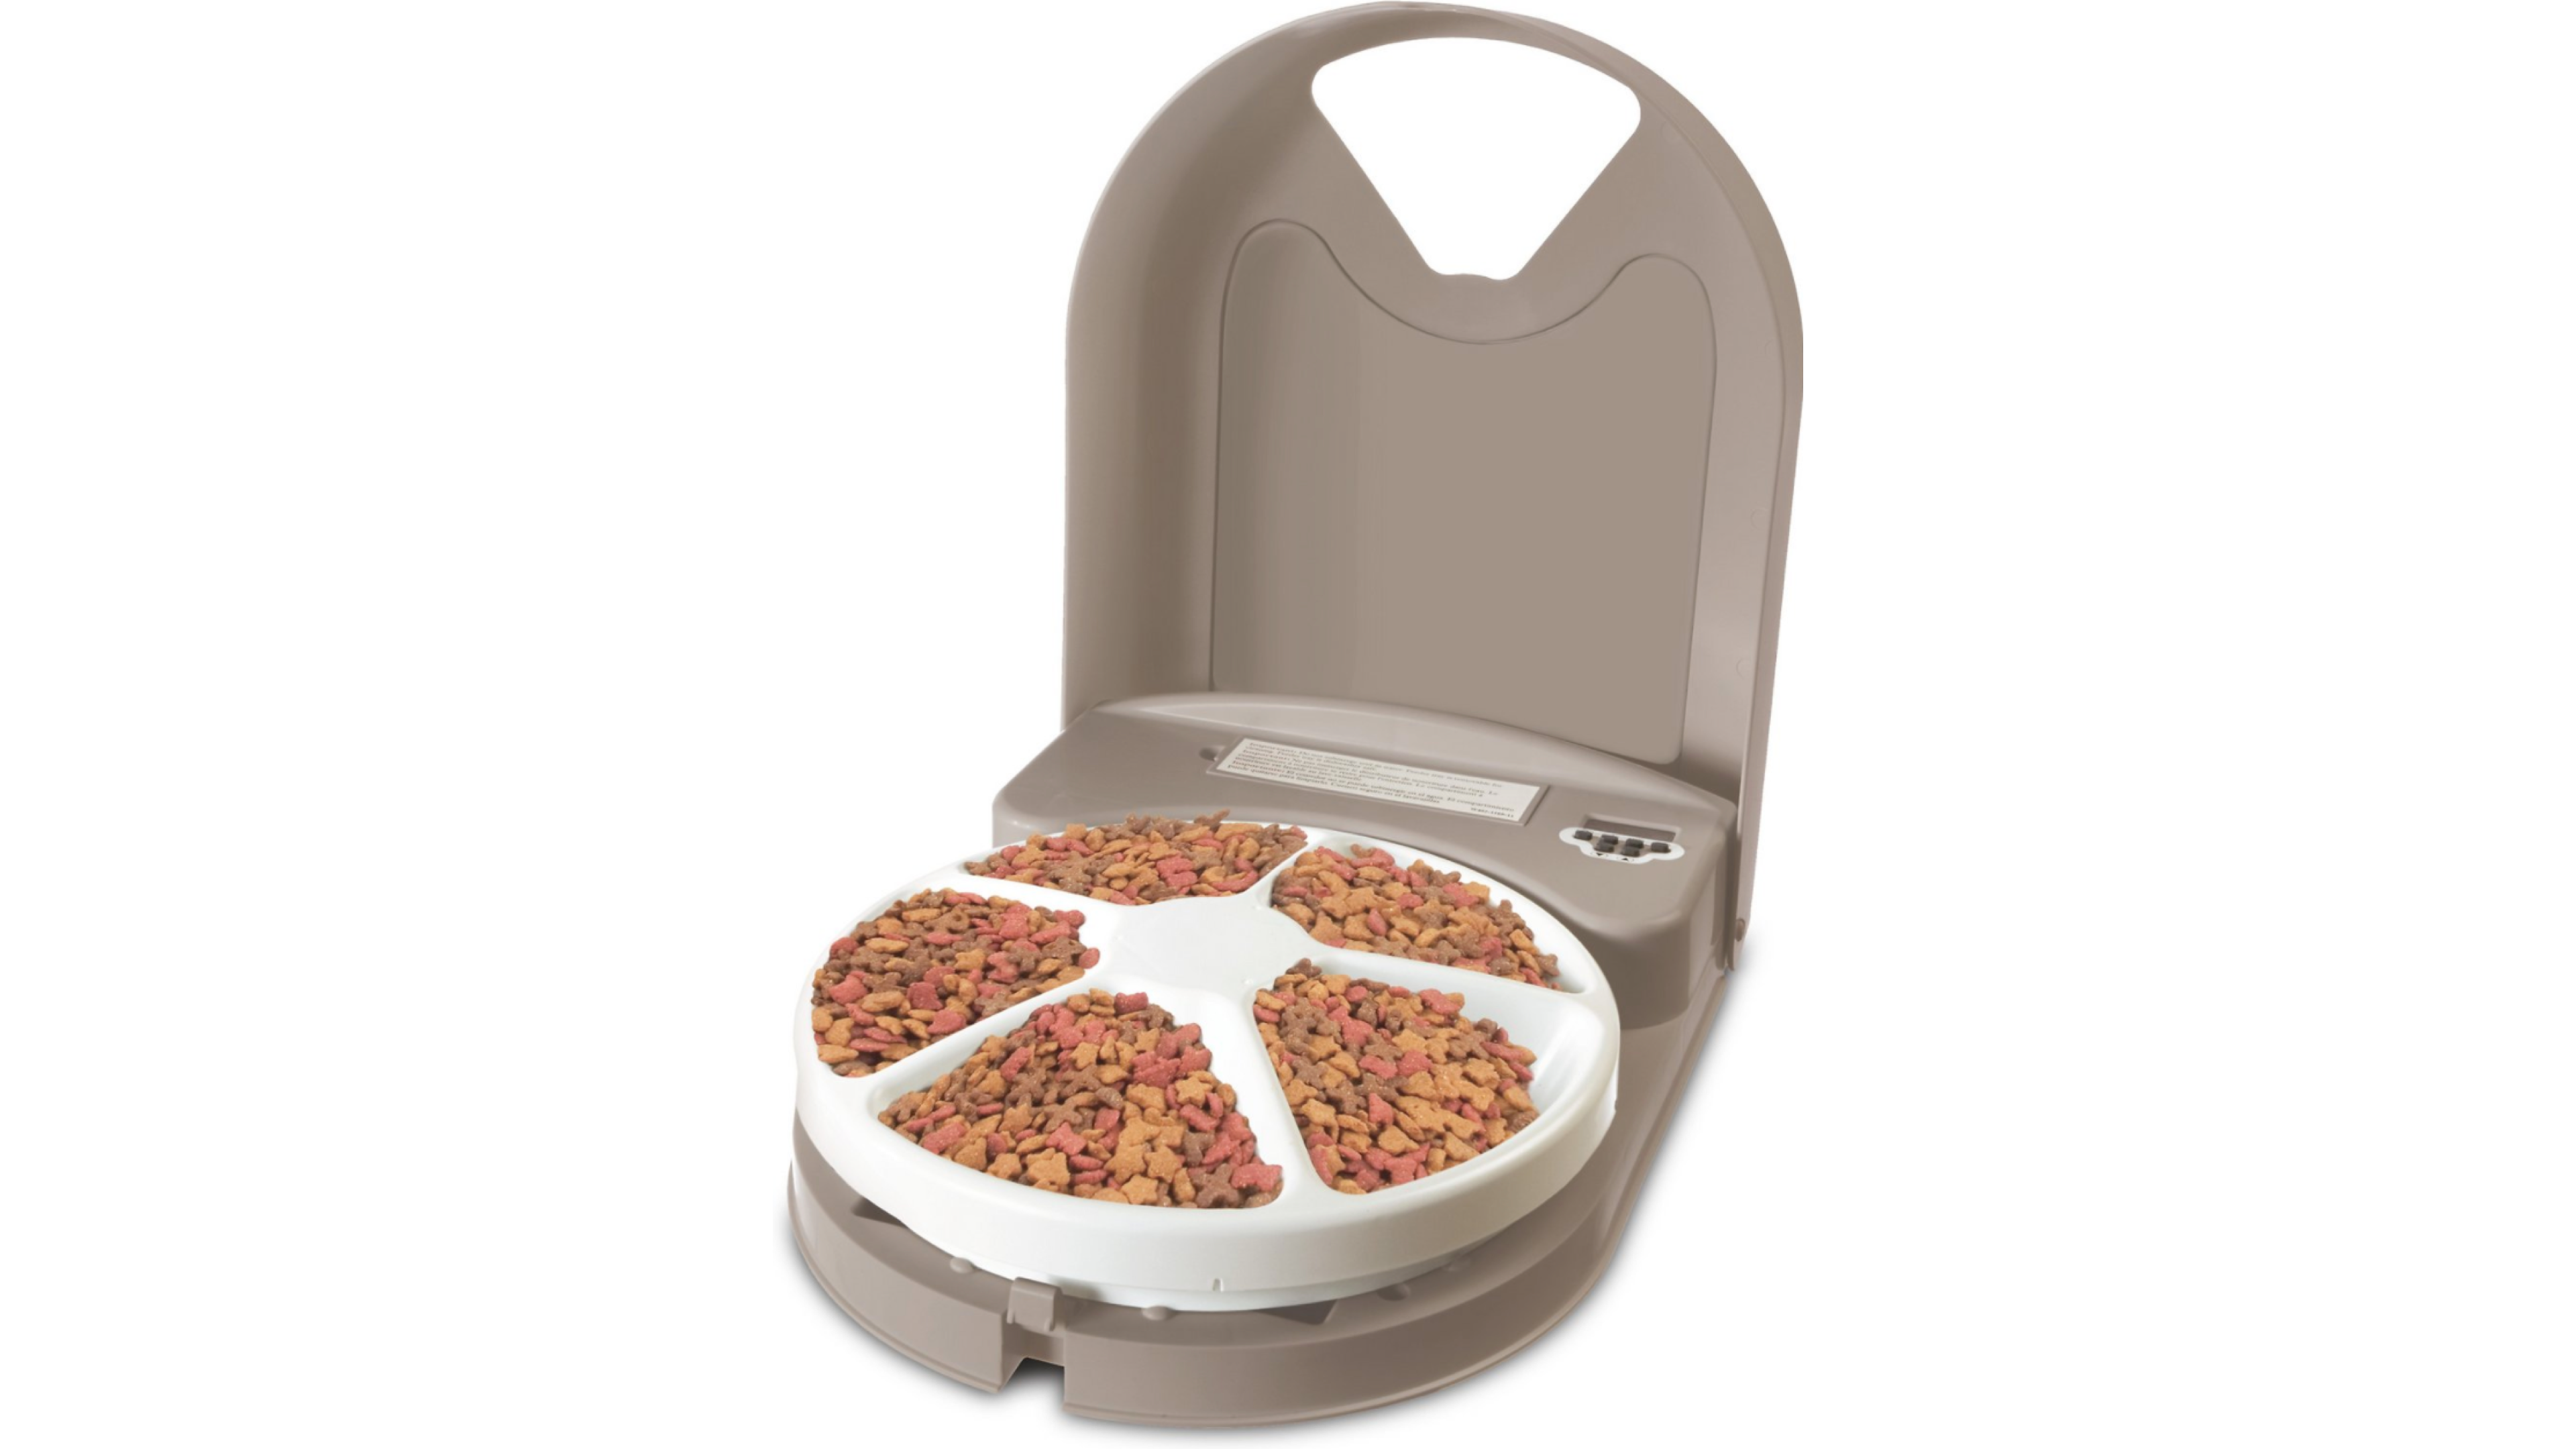 automatic pet feeder rotates at the same time every day to feed your pet